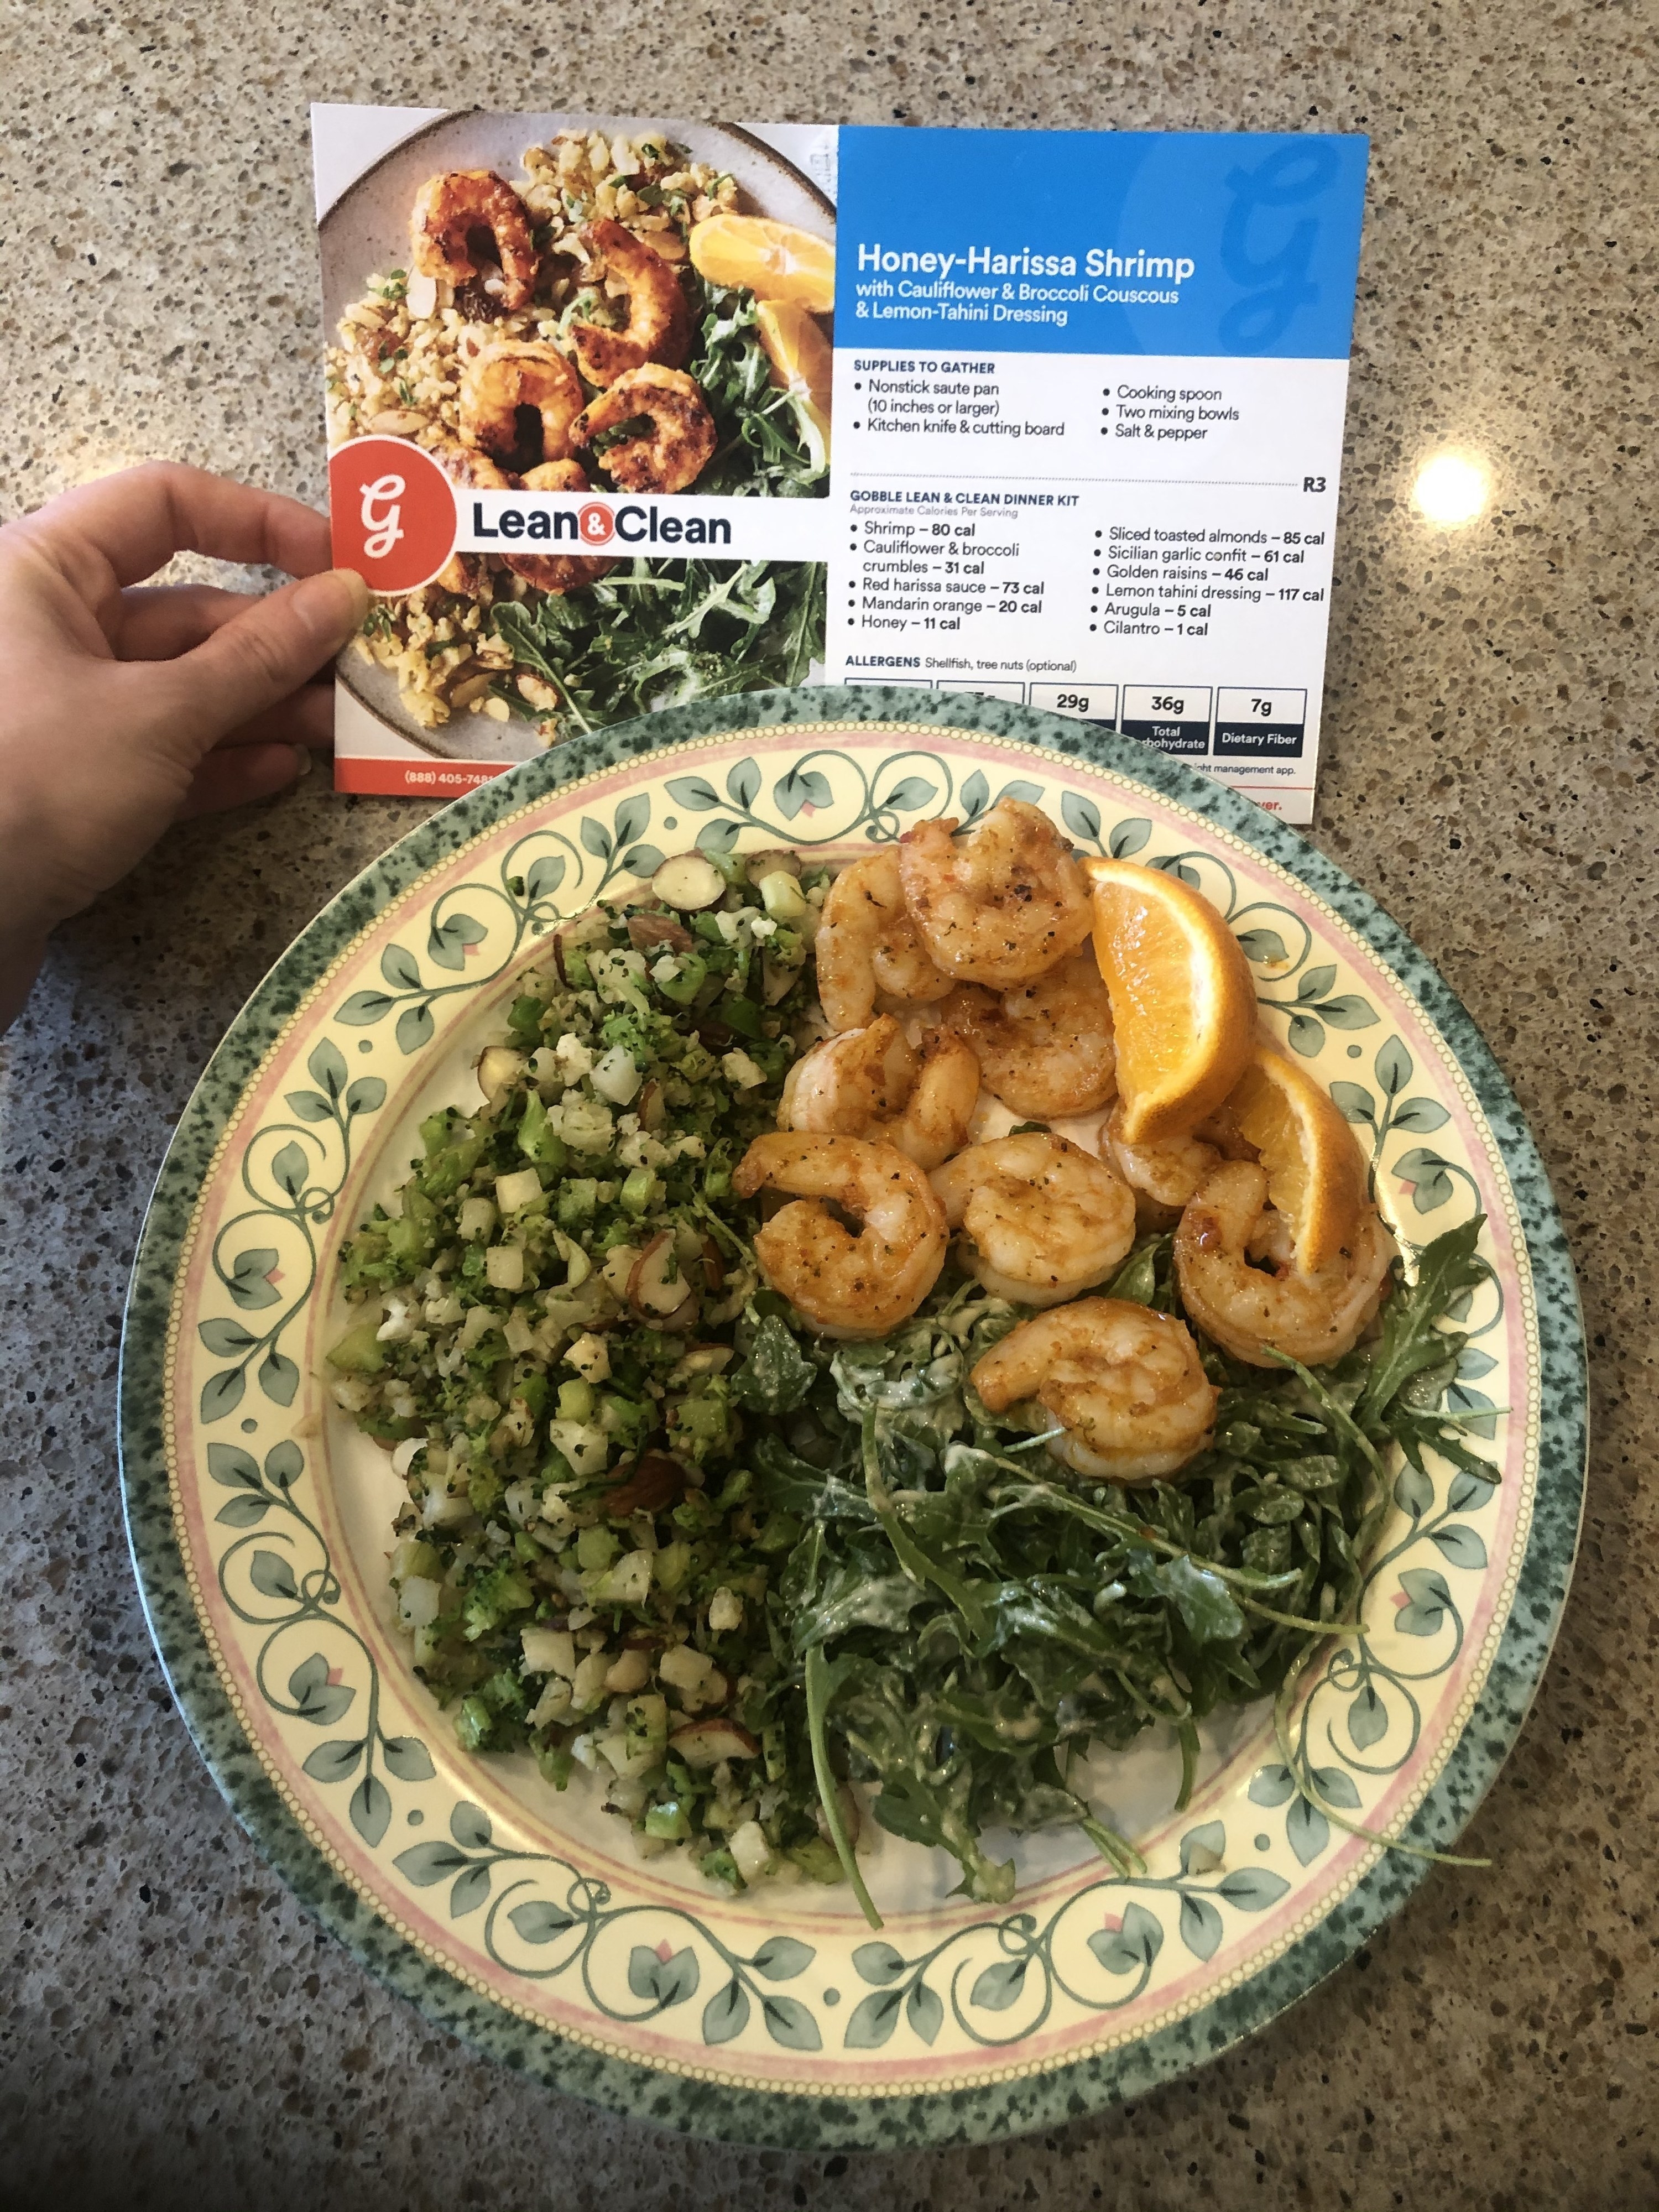 A freshly cooked meal and a meal kit card